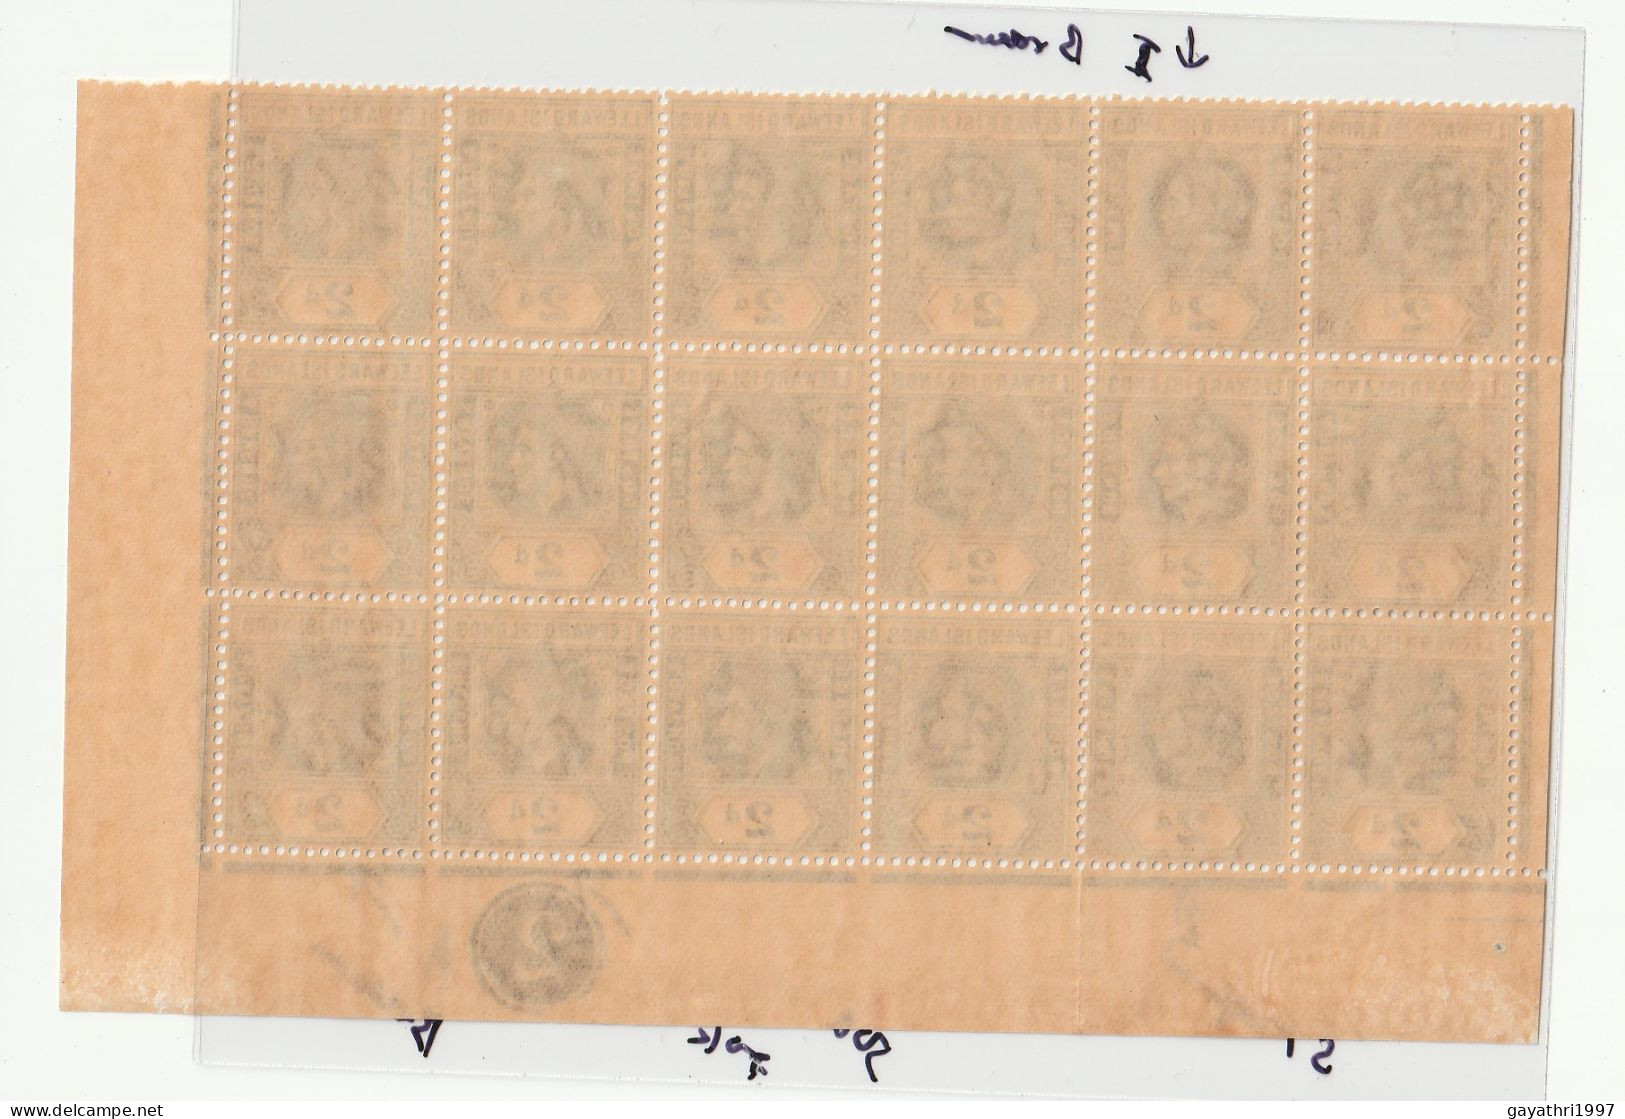 Leeward Island 1942 SG 103 Slate-  grey Block of 18 stamps with errors and many variety's,  ( sh17)